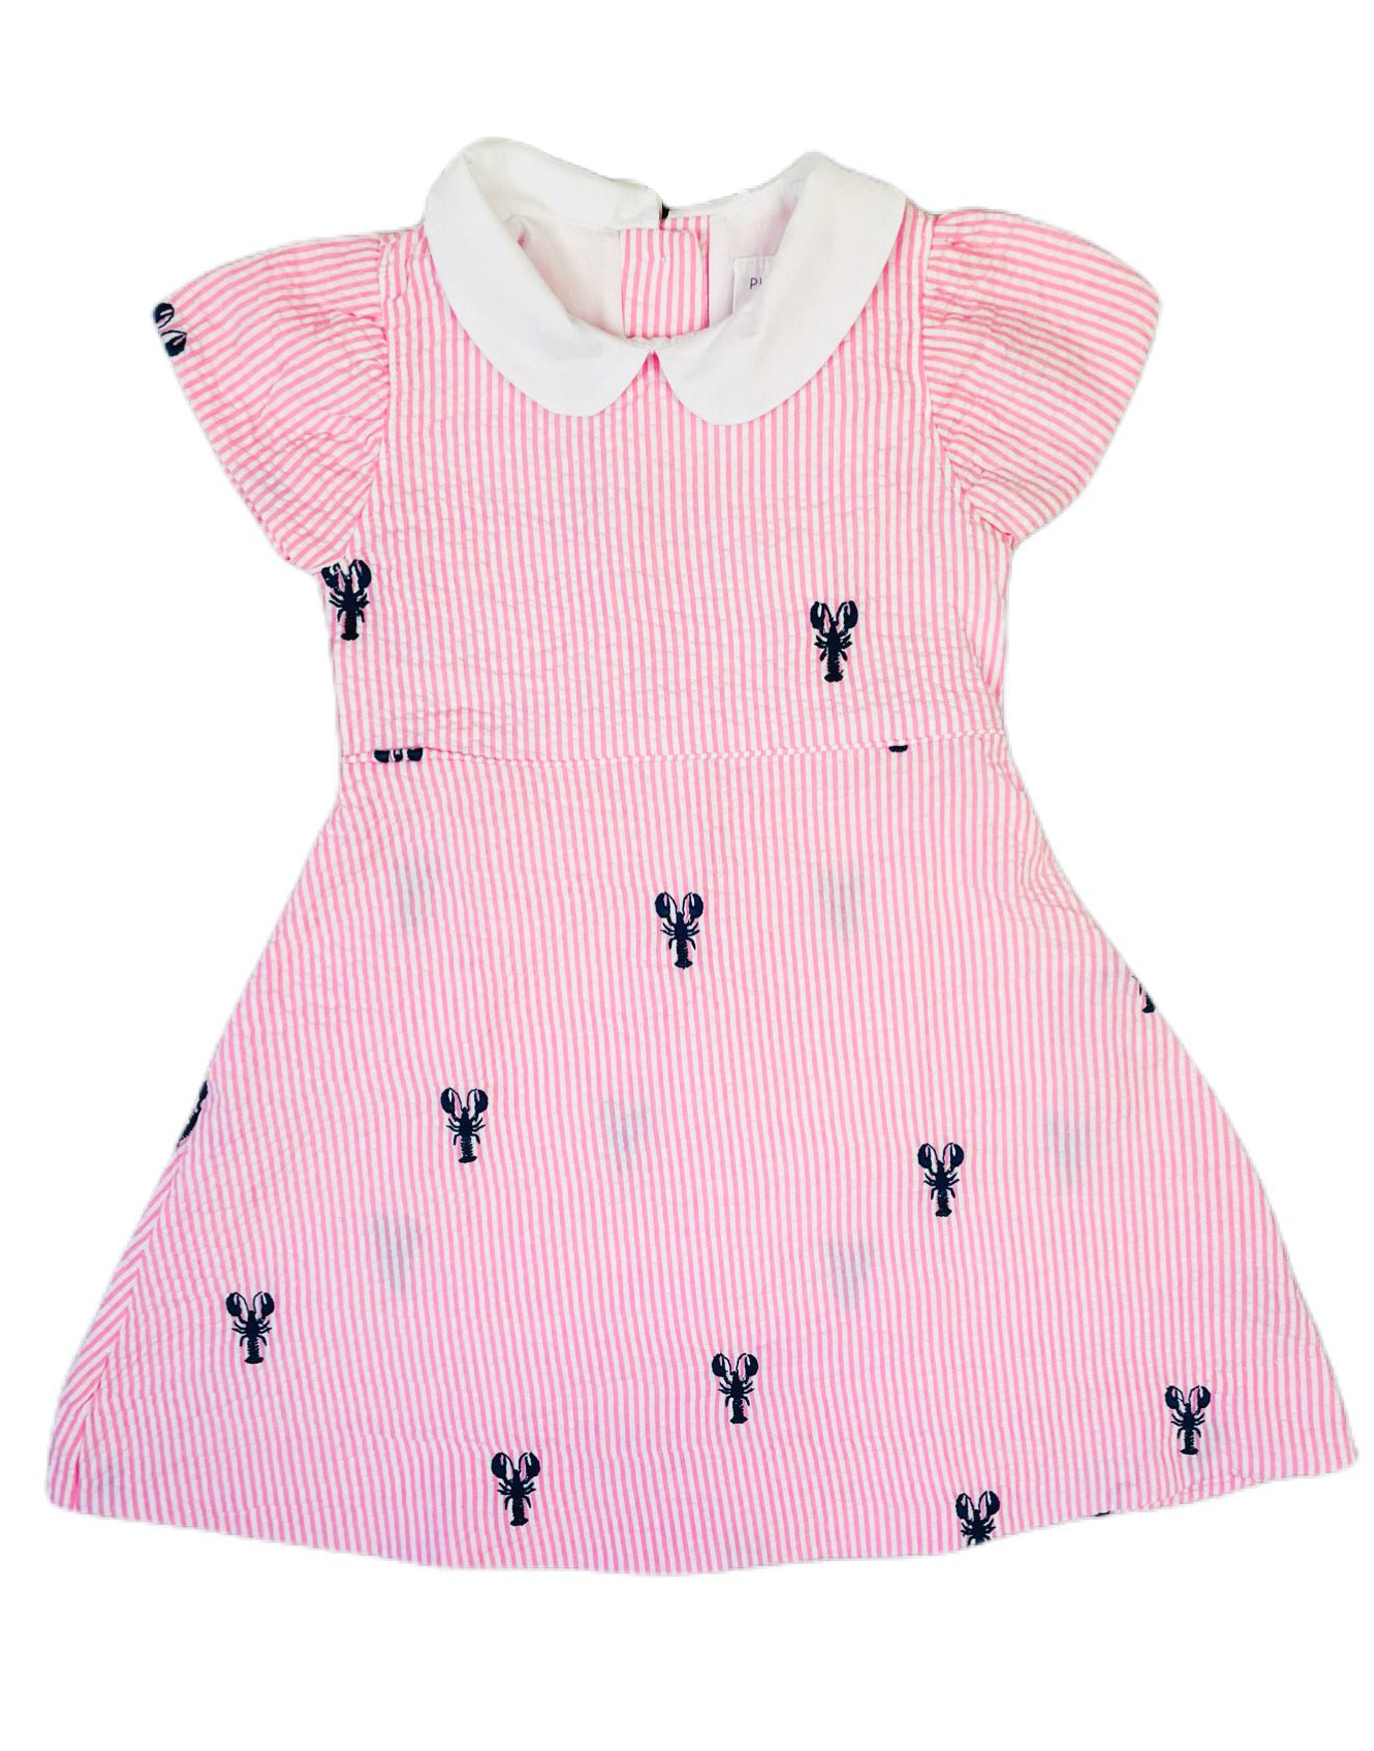 Pink Seersucker Girls Dress with Navy Embroidered Lobsters and Peter Pan Collar